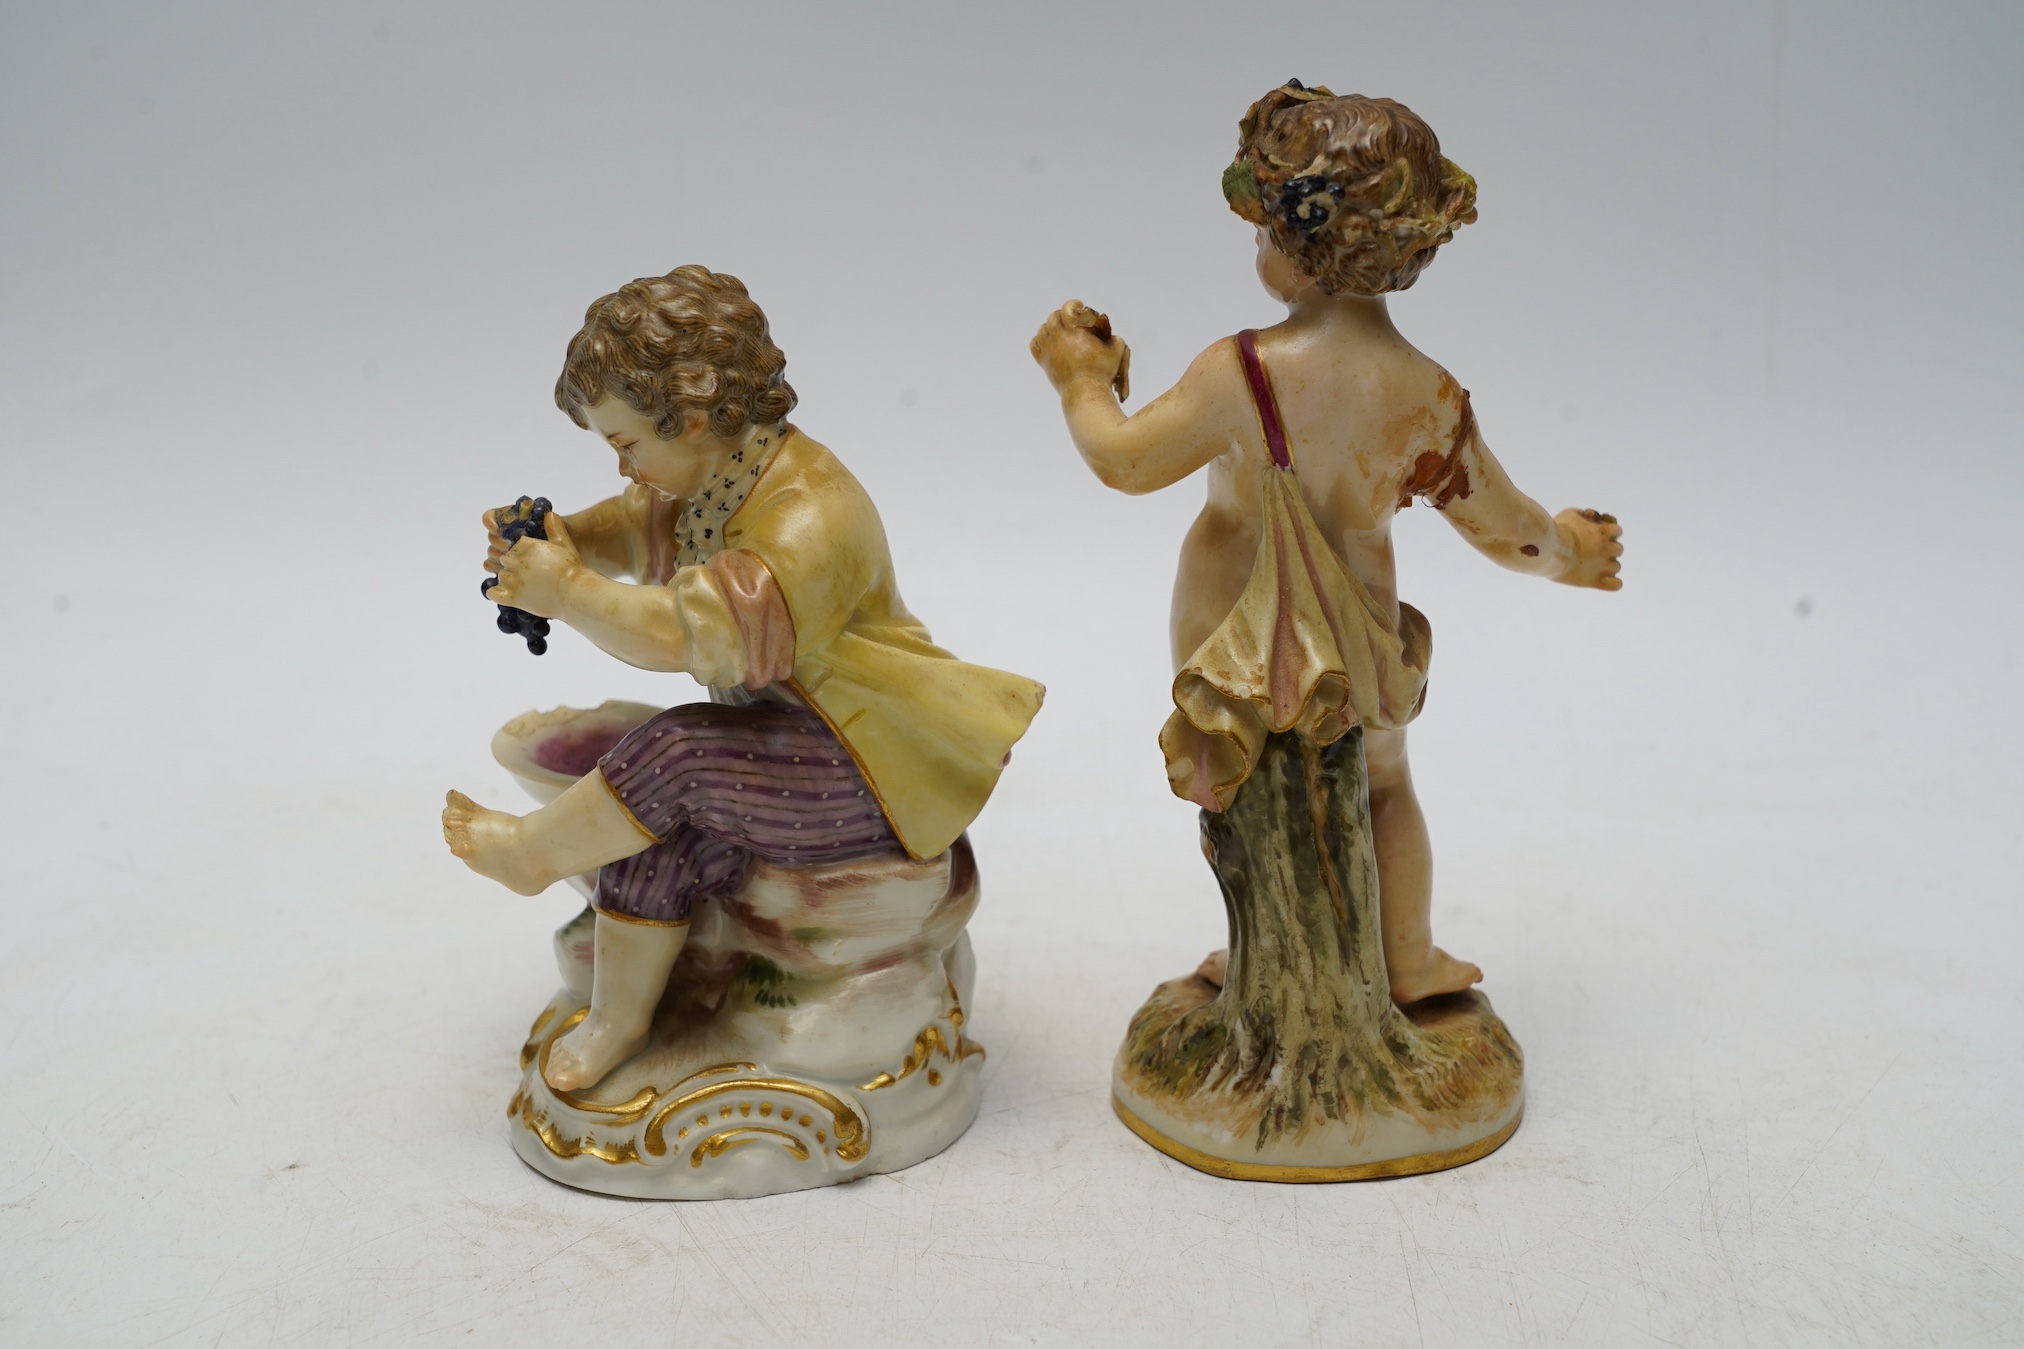 Two Meissen porcelain figures, boys with grapes, largest 13cm high. Condition - poor